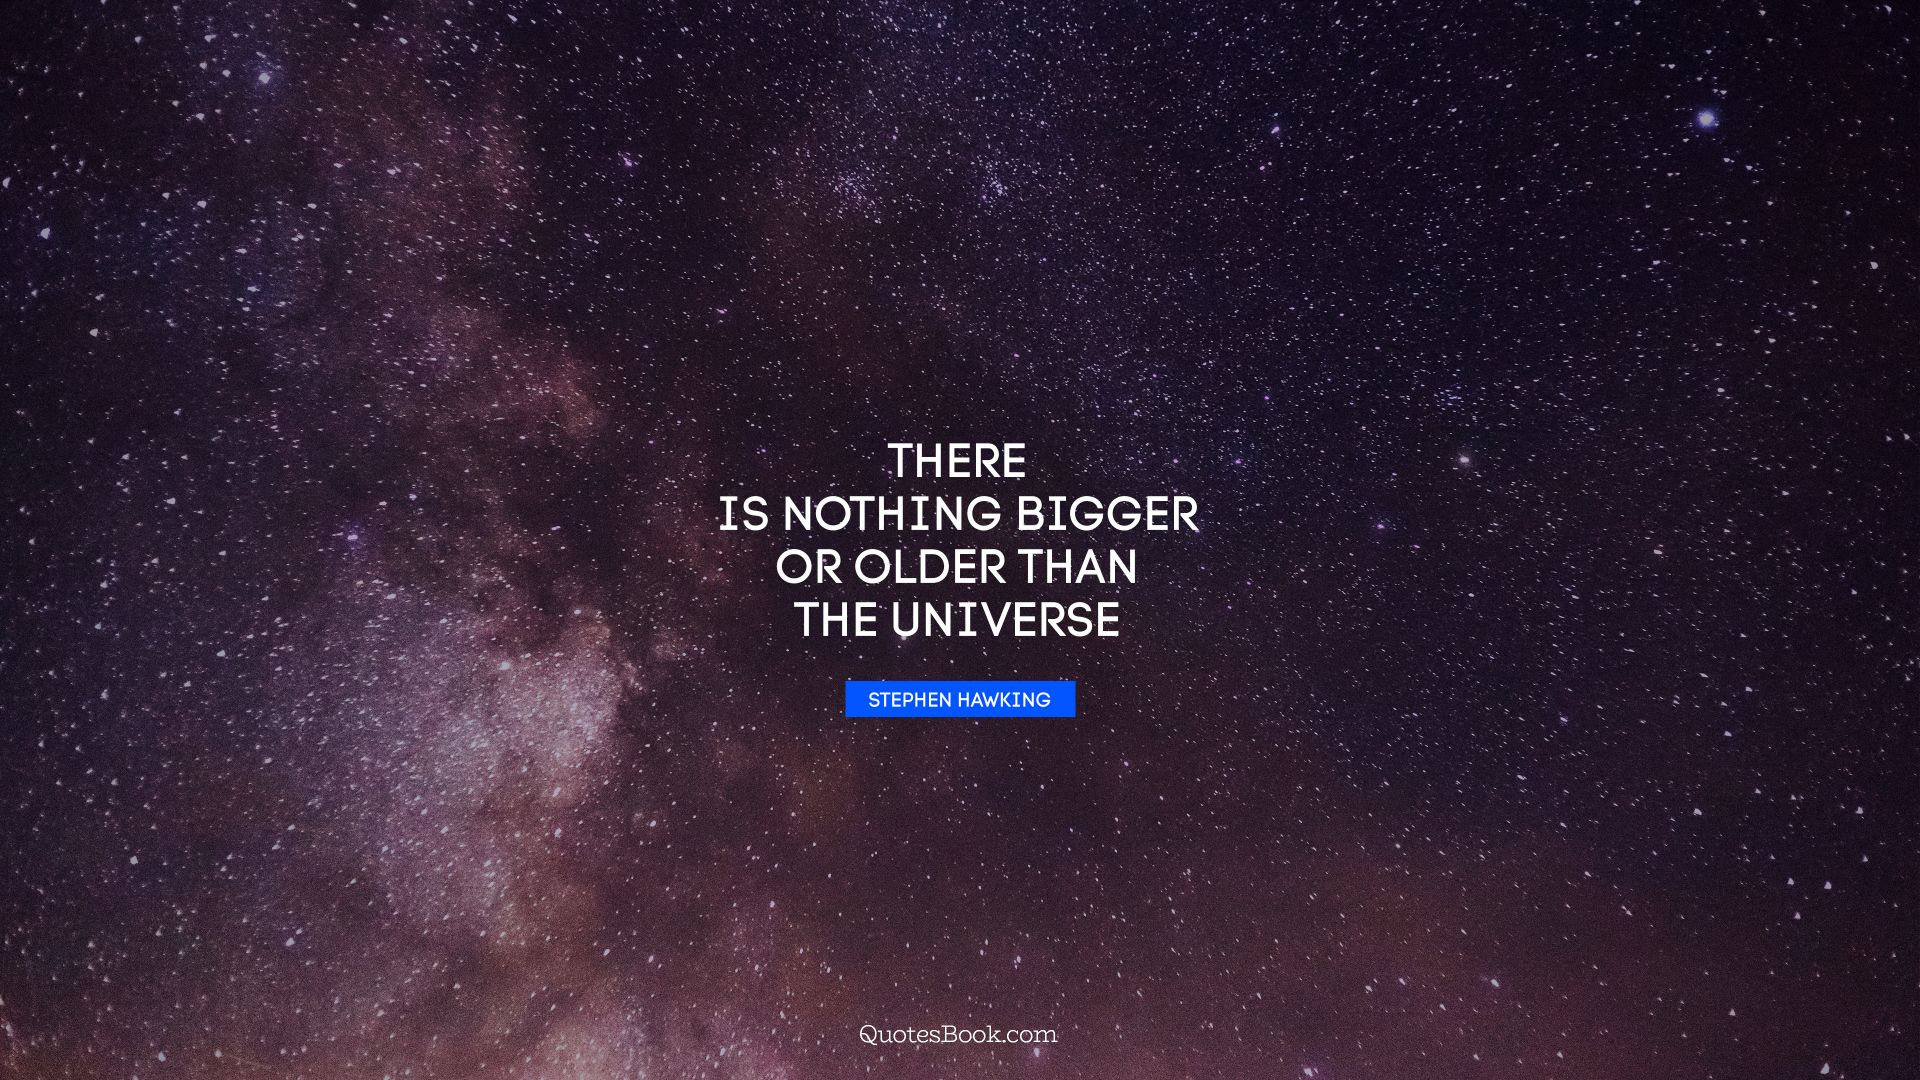 There is nothing bigger or older than the universe. - Quote by Stephen Hawking